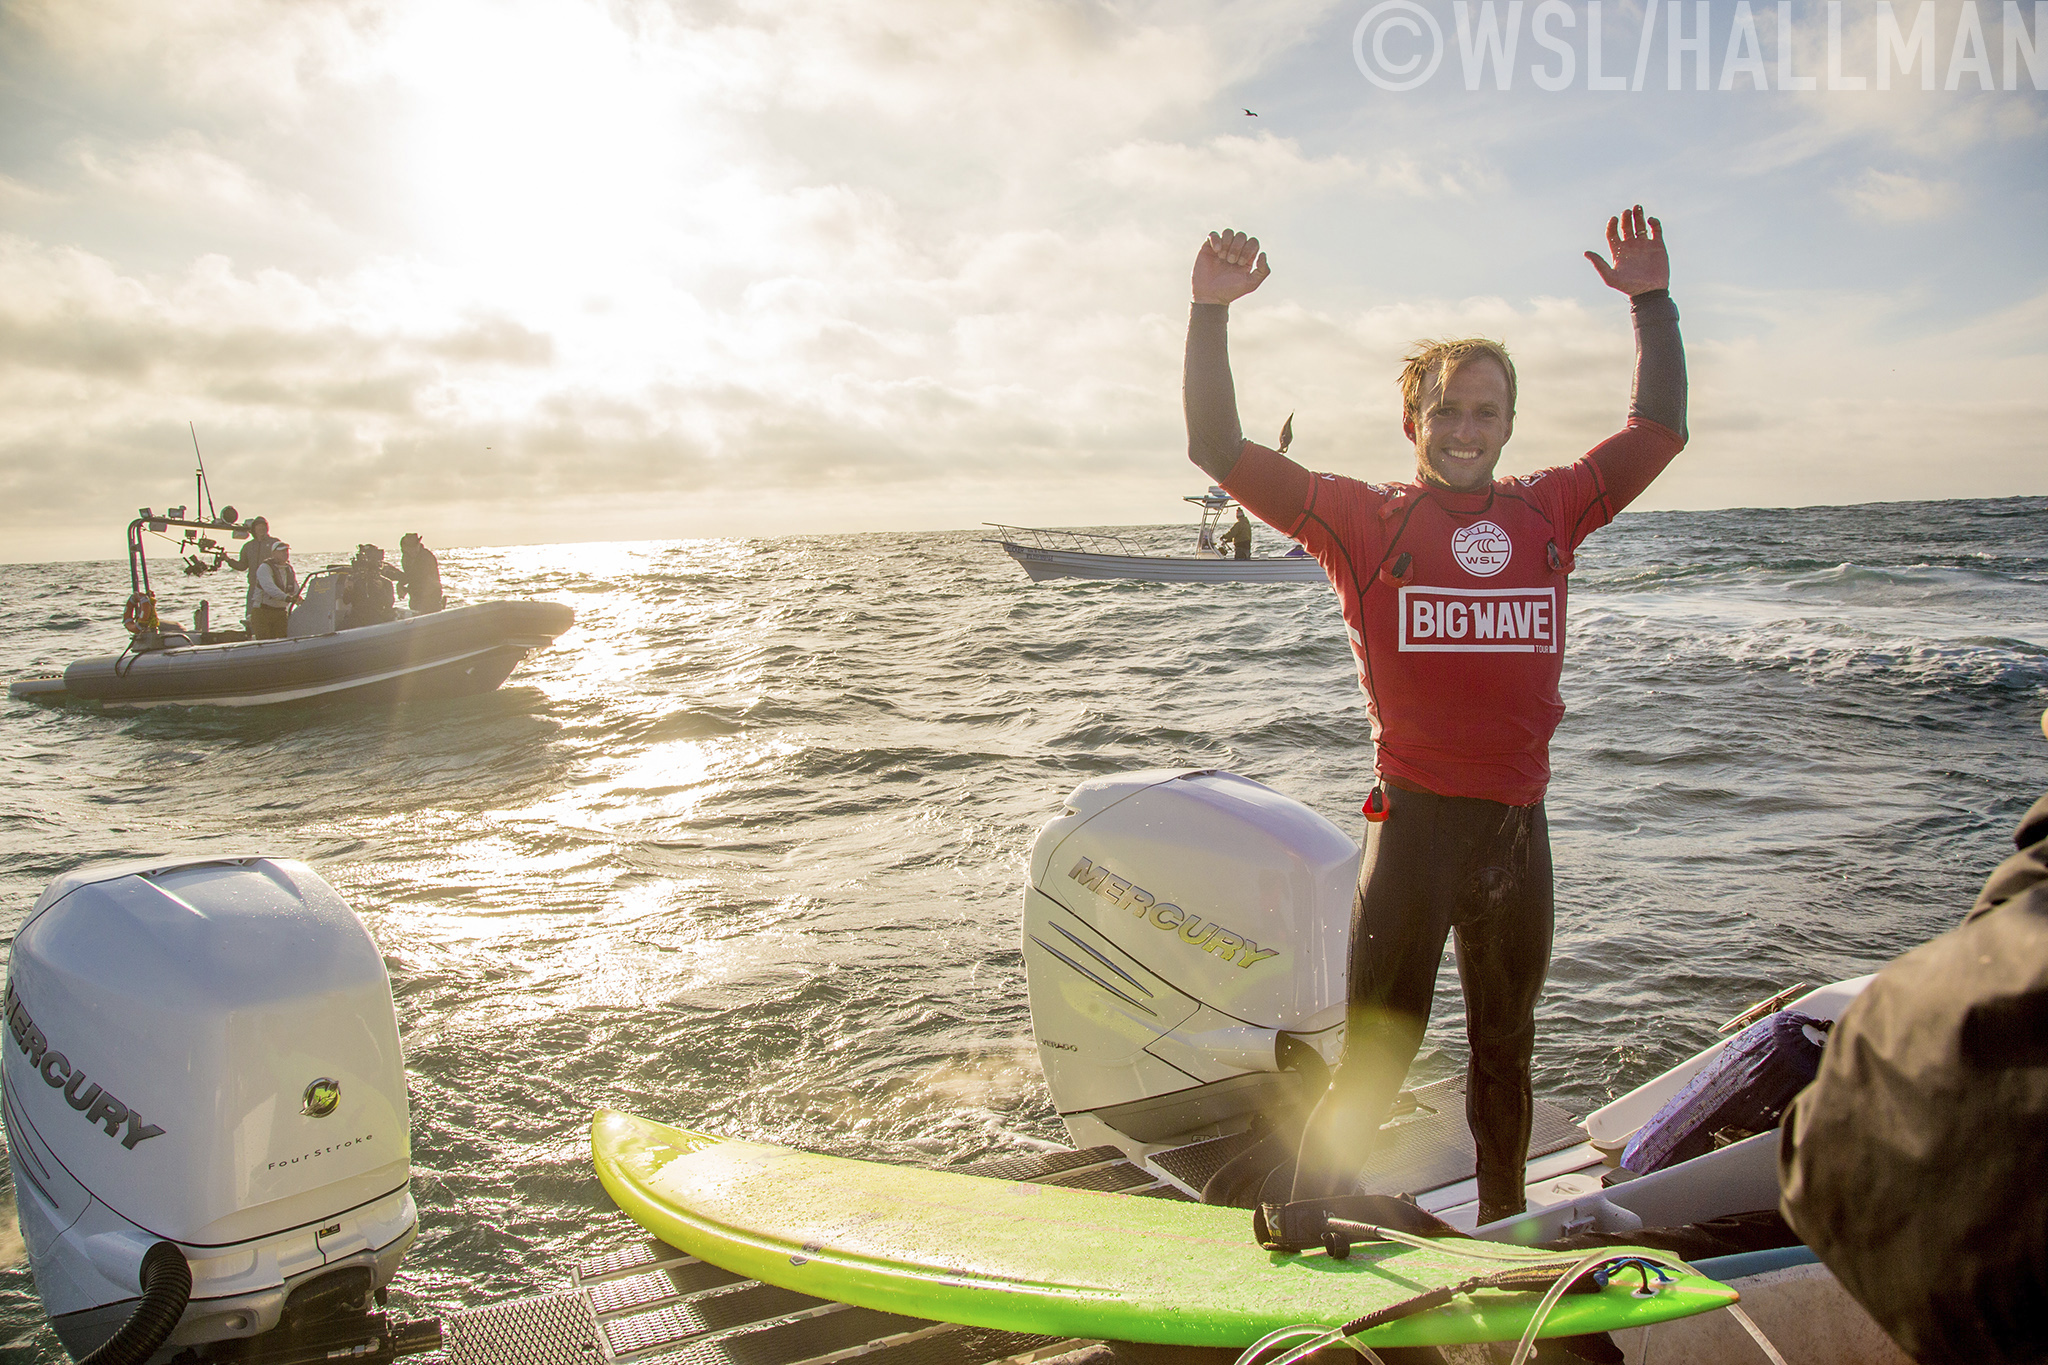 Josh Kerr formerly of Australia, now of San Deigo, California (pictured) celebrating his victory at the Todos Santos Challenge in monstorous 30-4-ft surf at Todos Santos off the coast of Baja, Mexico on Sunday January 17, 2015.